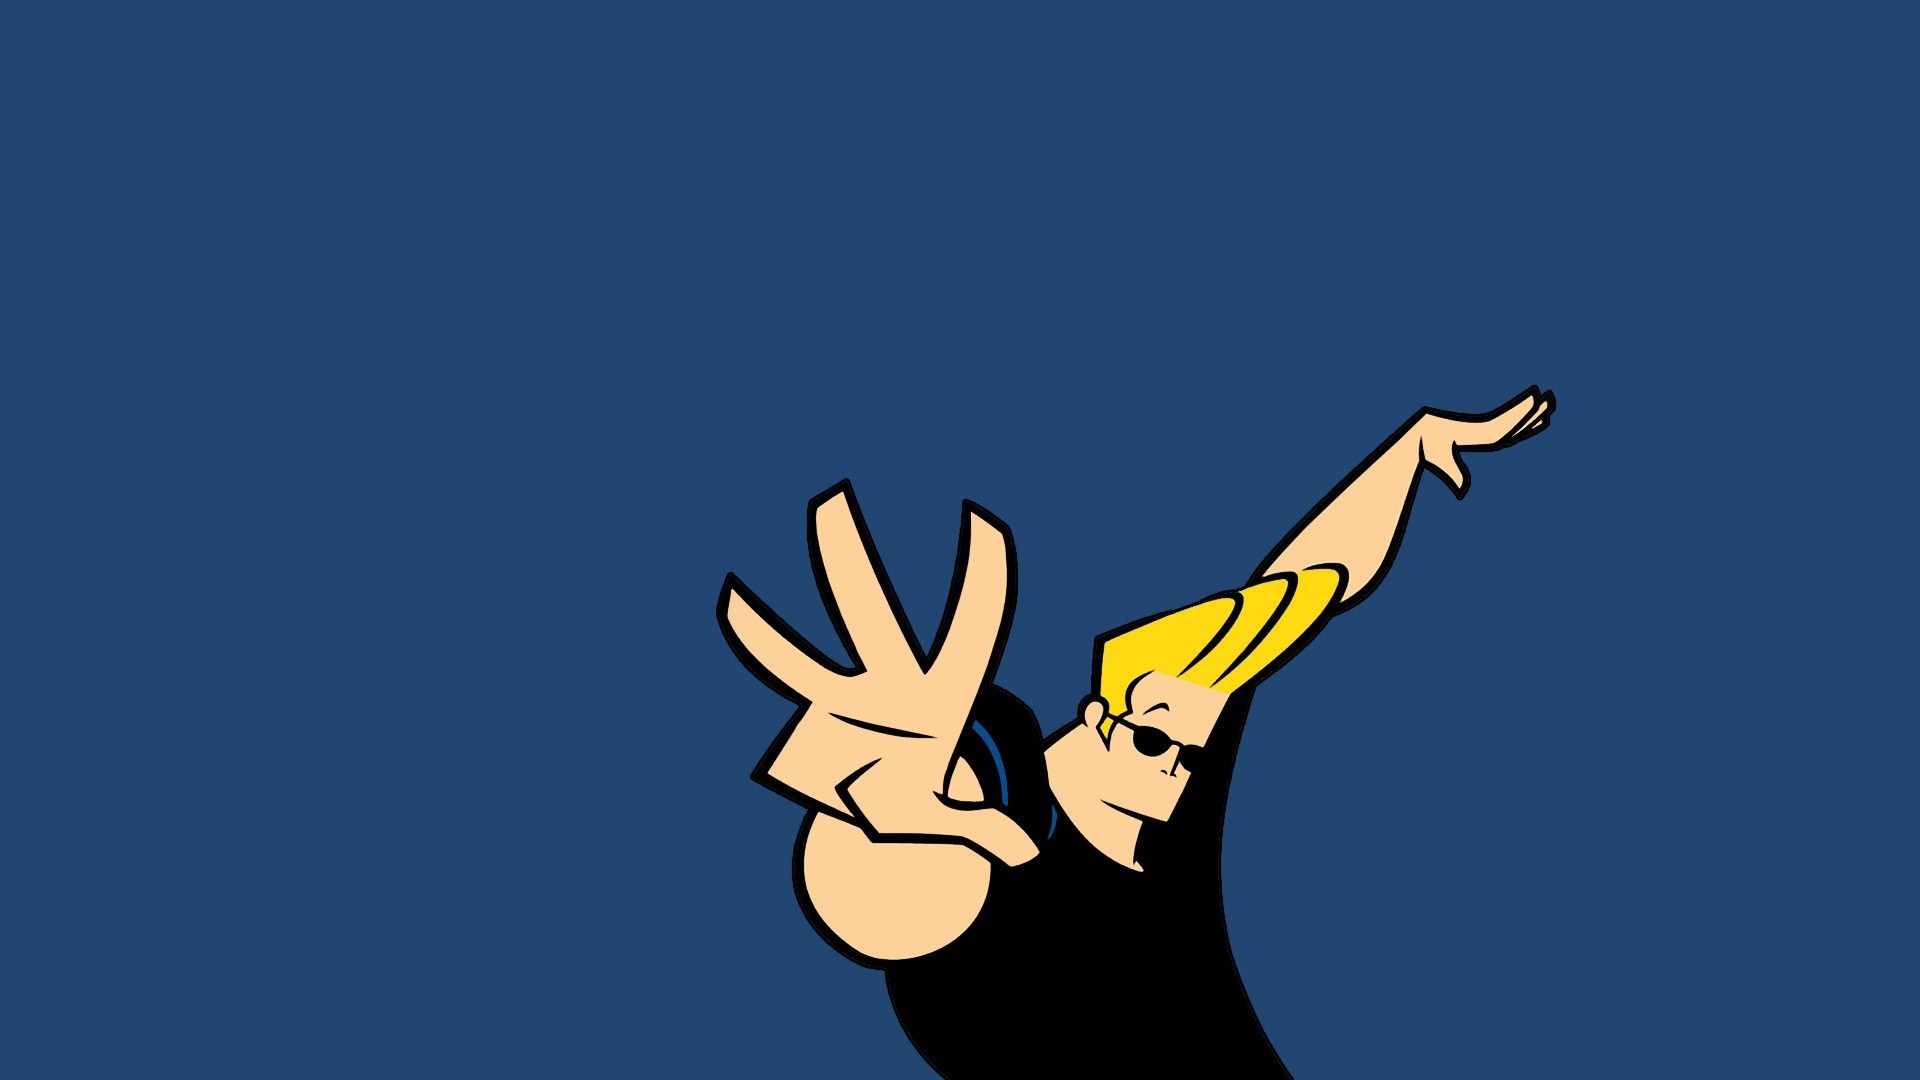 Download Cartoon Johnny Bravo wallpaper in 3D   Abstract wallpapers